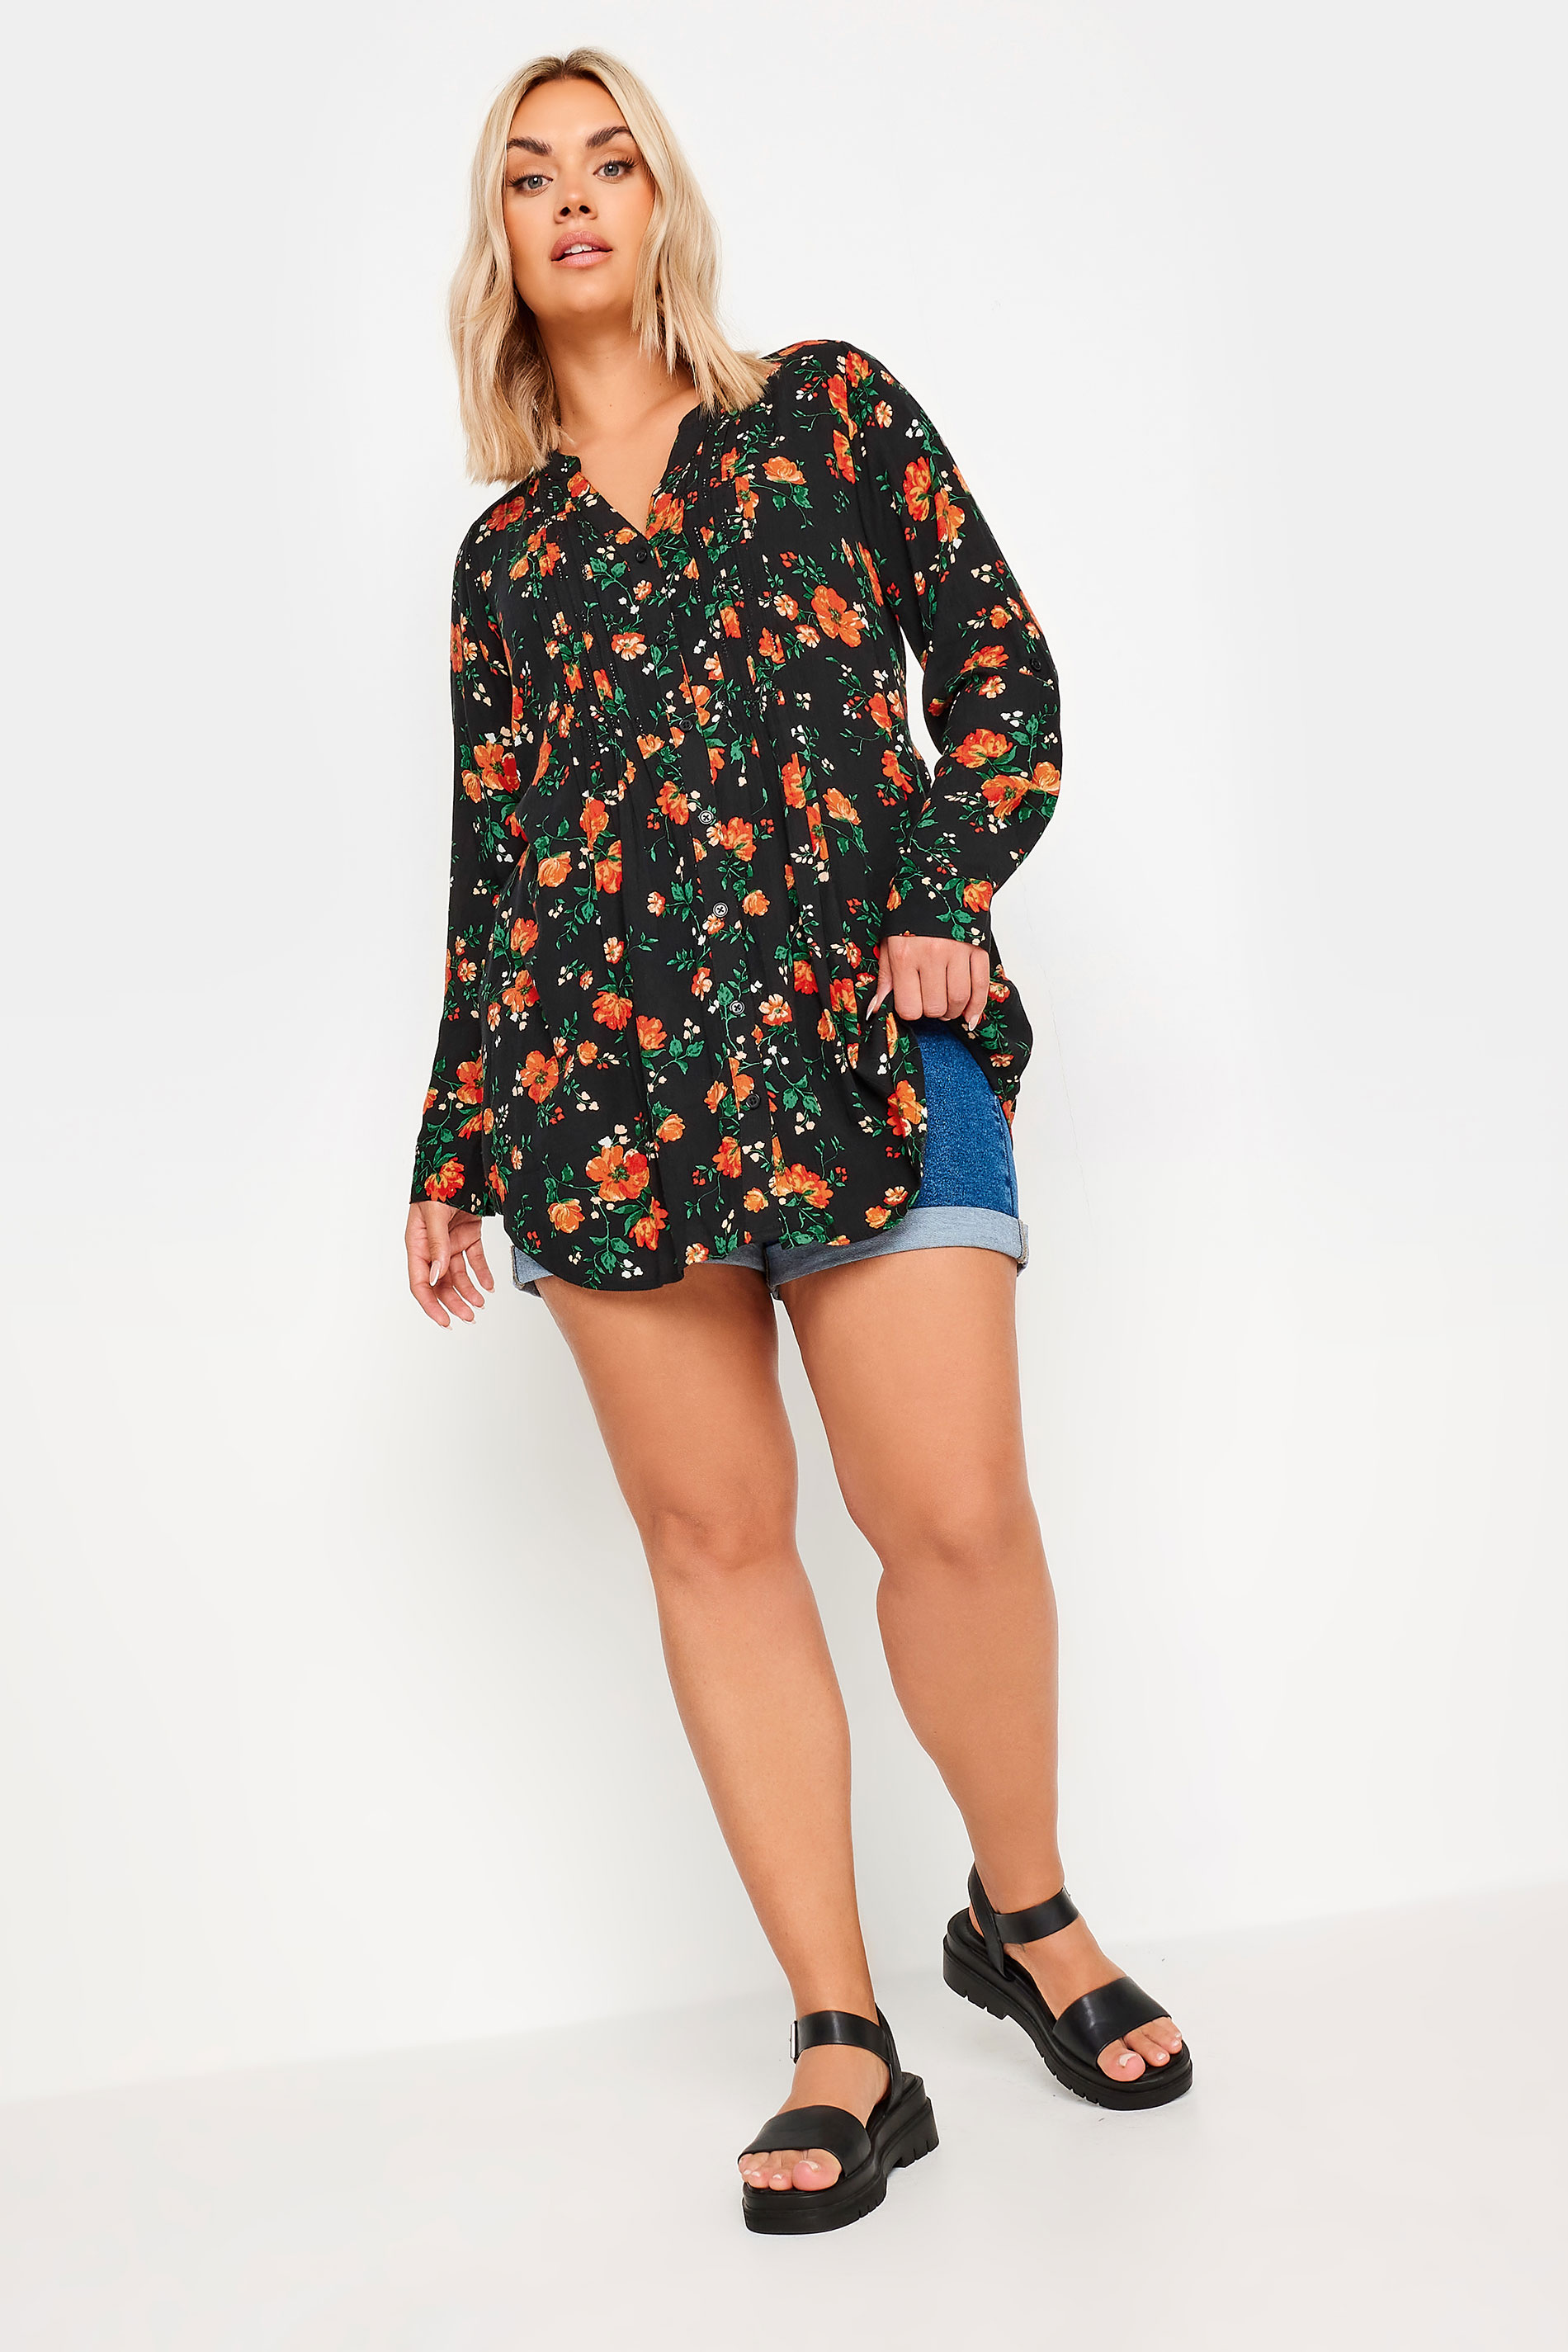 YOURS Plus Size Black Floral Pinruck Shirt | Yours Clothing 2